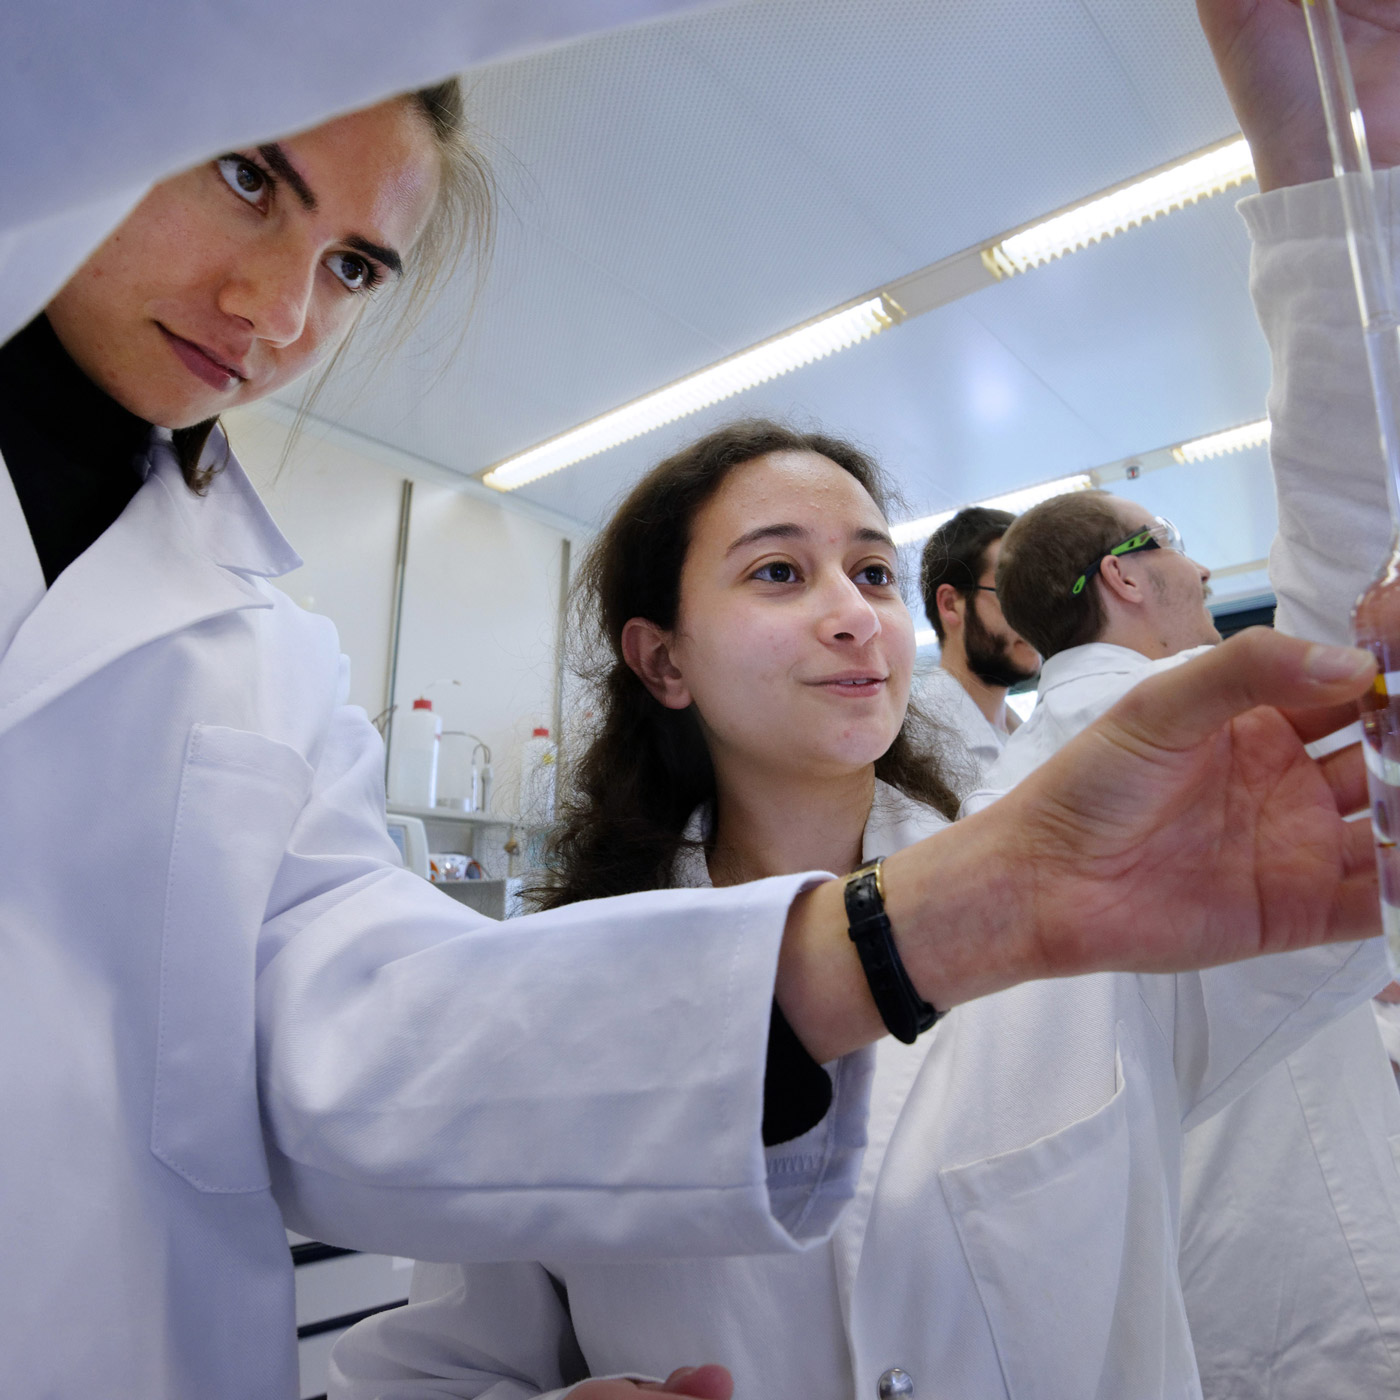 Photograph of students working a science lab, taken by Fullframe Creative, based in Lausanne and Geneva, in Switzerland.